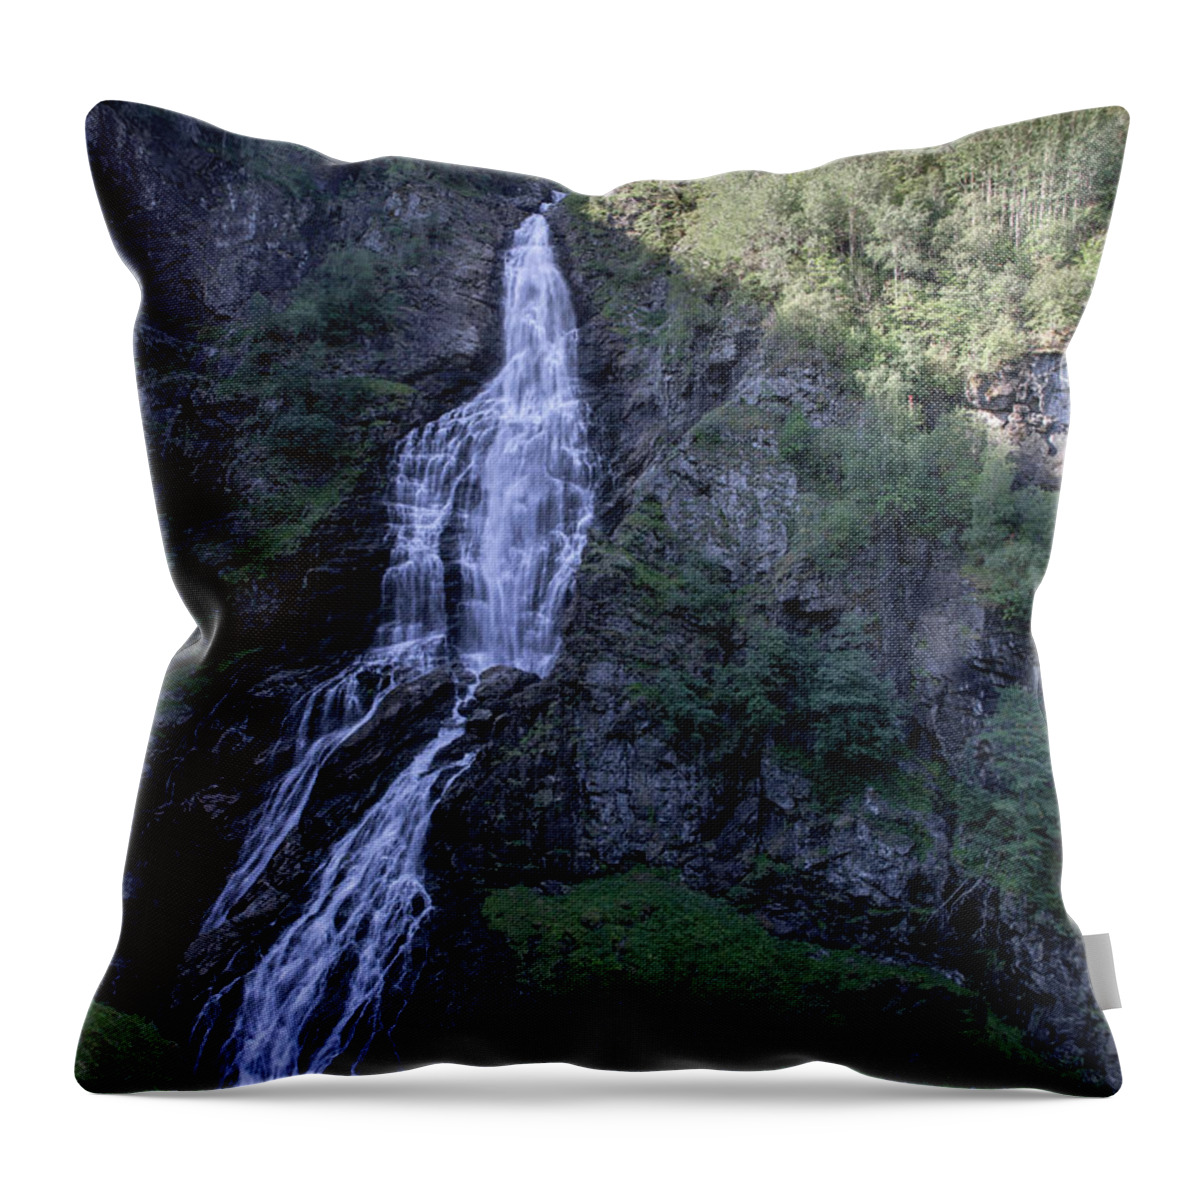 Outdoors Throw Pillow featuring the photograph Sivlefossen, Norway by Andreas Levi